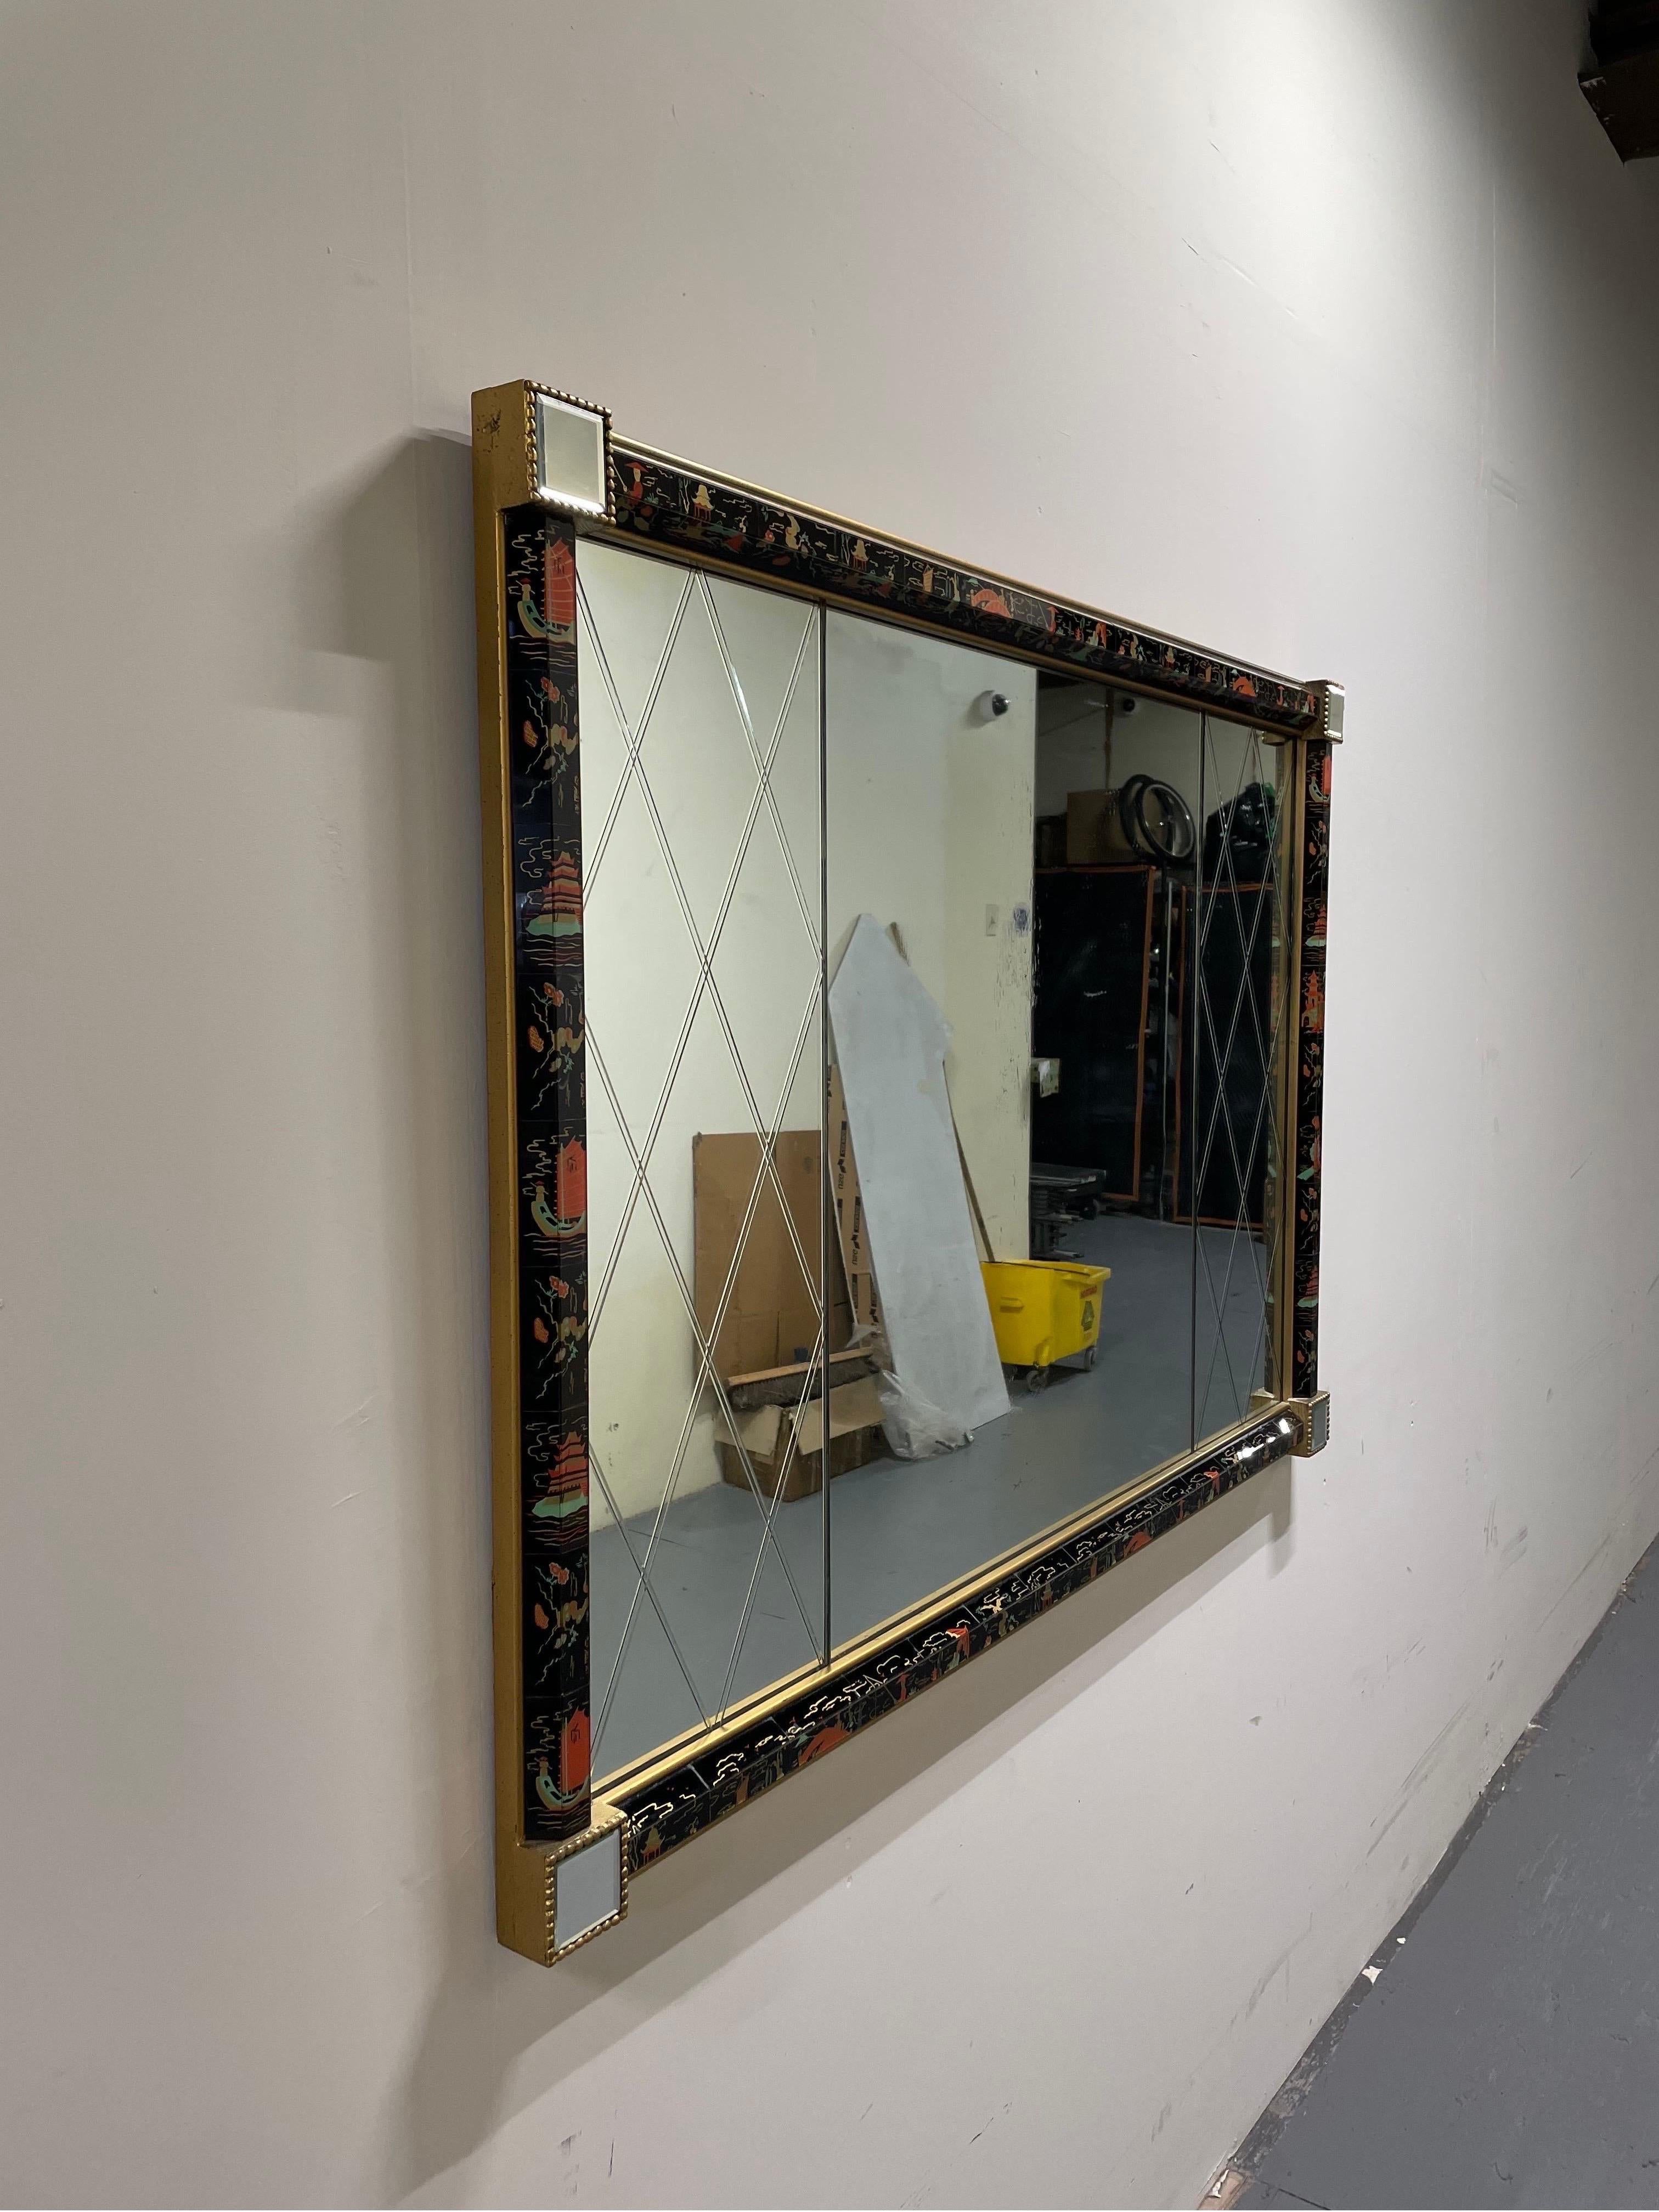 Spectacular eglomise mirror. Harlequin side panels flank center mirror with natural antiquing finish. All boarders with half hex reverse painted panes capped with mirrors corner. WOW
Curbside to NYC/Philly $300